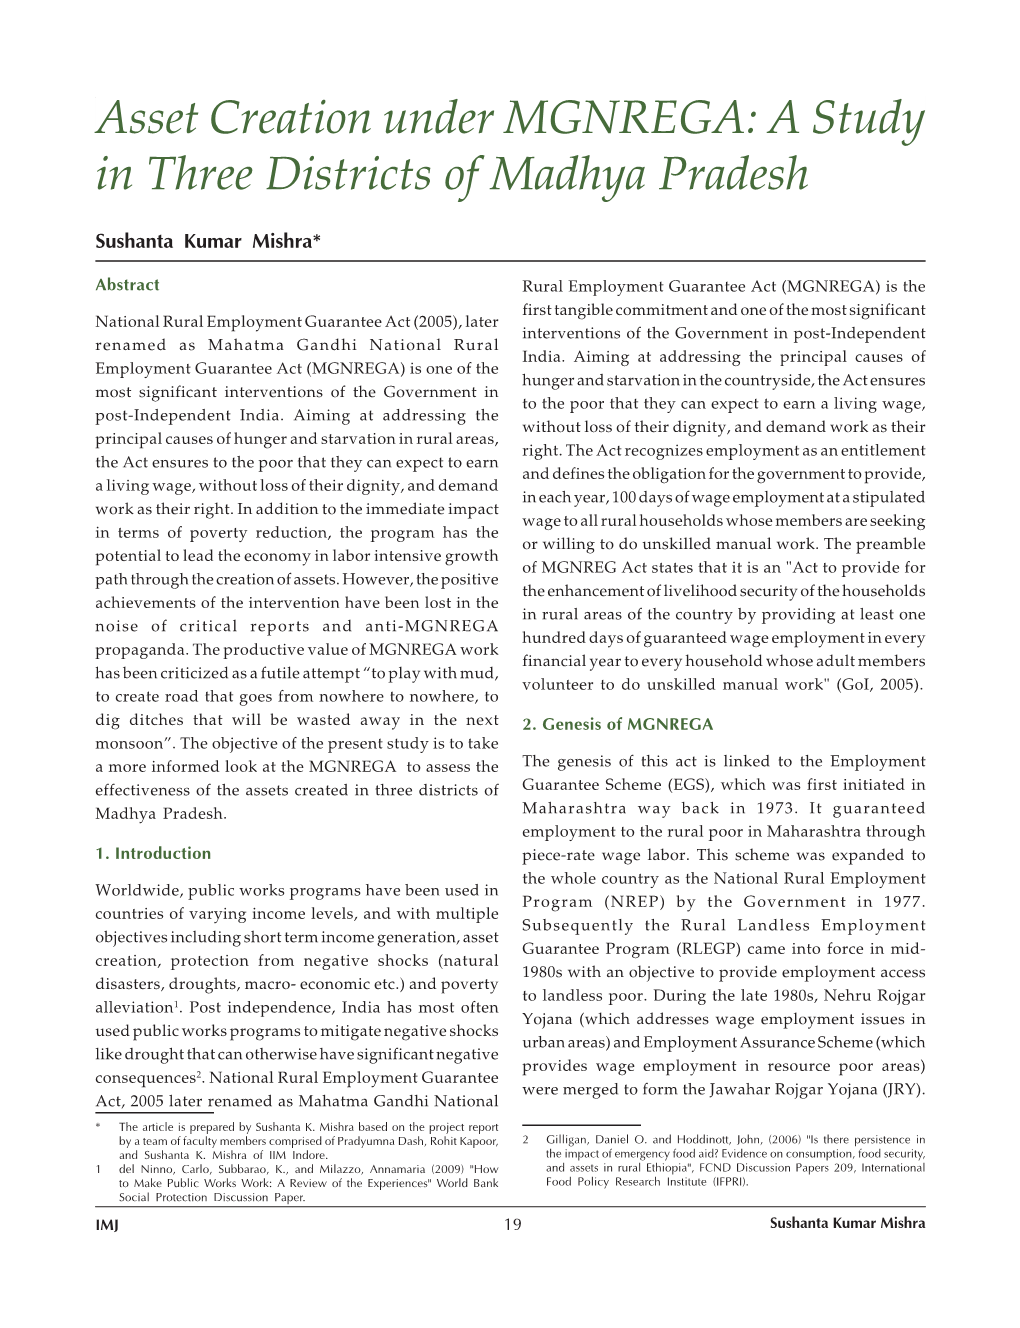 Asset Creation Under MGNREGA: a Study in Three Districts of Madhya